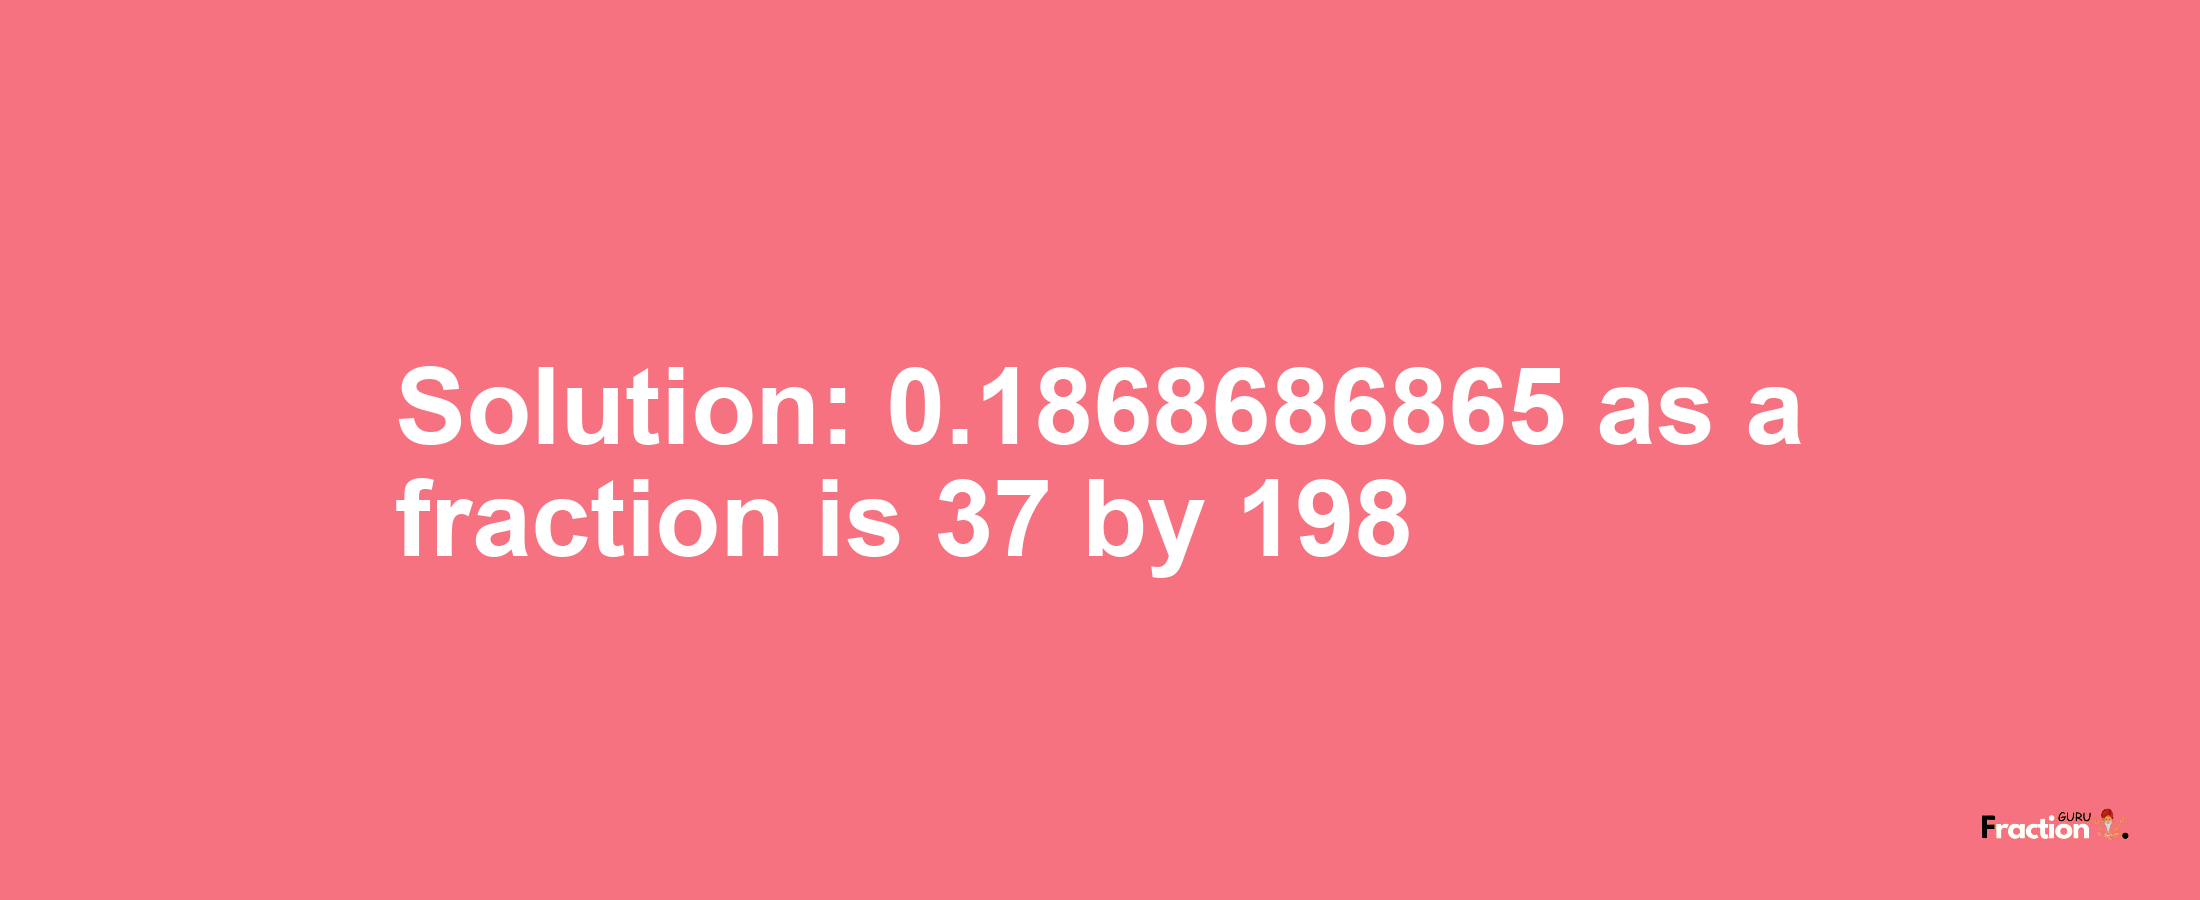 Solution:0.1868686865 as a fraction is 37/198